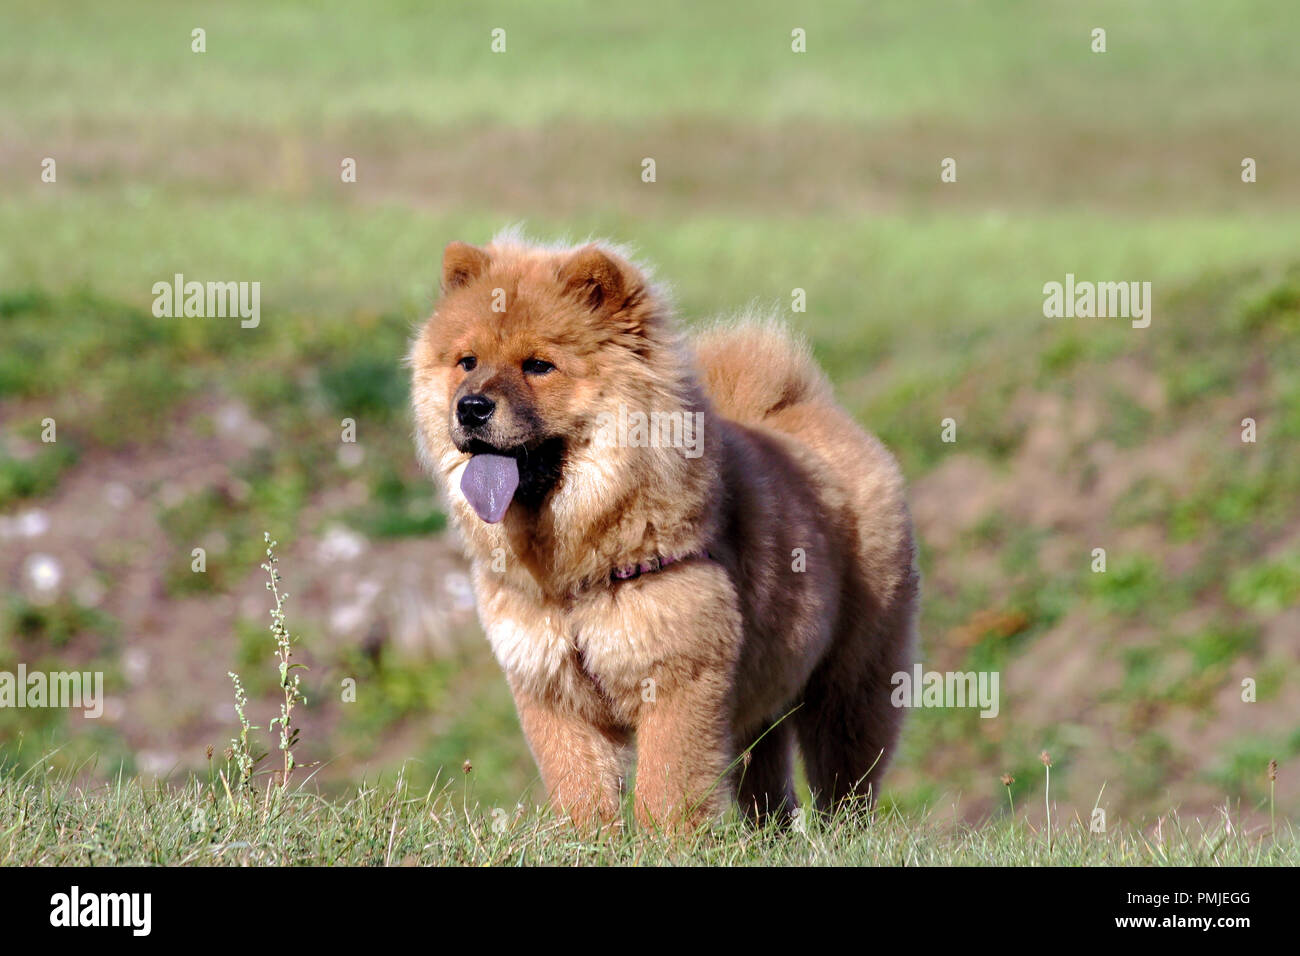 chow-chow dog breed, one puppy stand on green grass on field in nature, small black eyes look away, brown hair, blue tongue, animal wearing harness Stock Photo